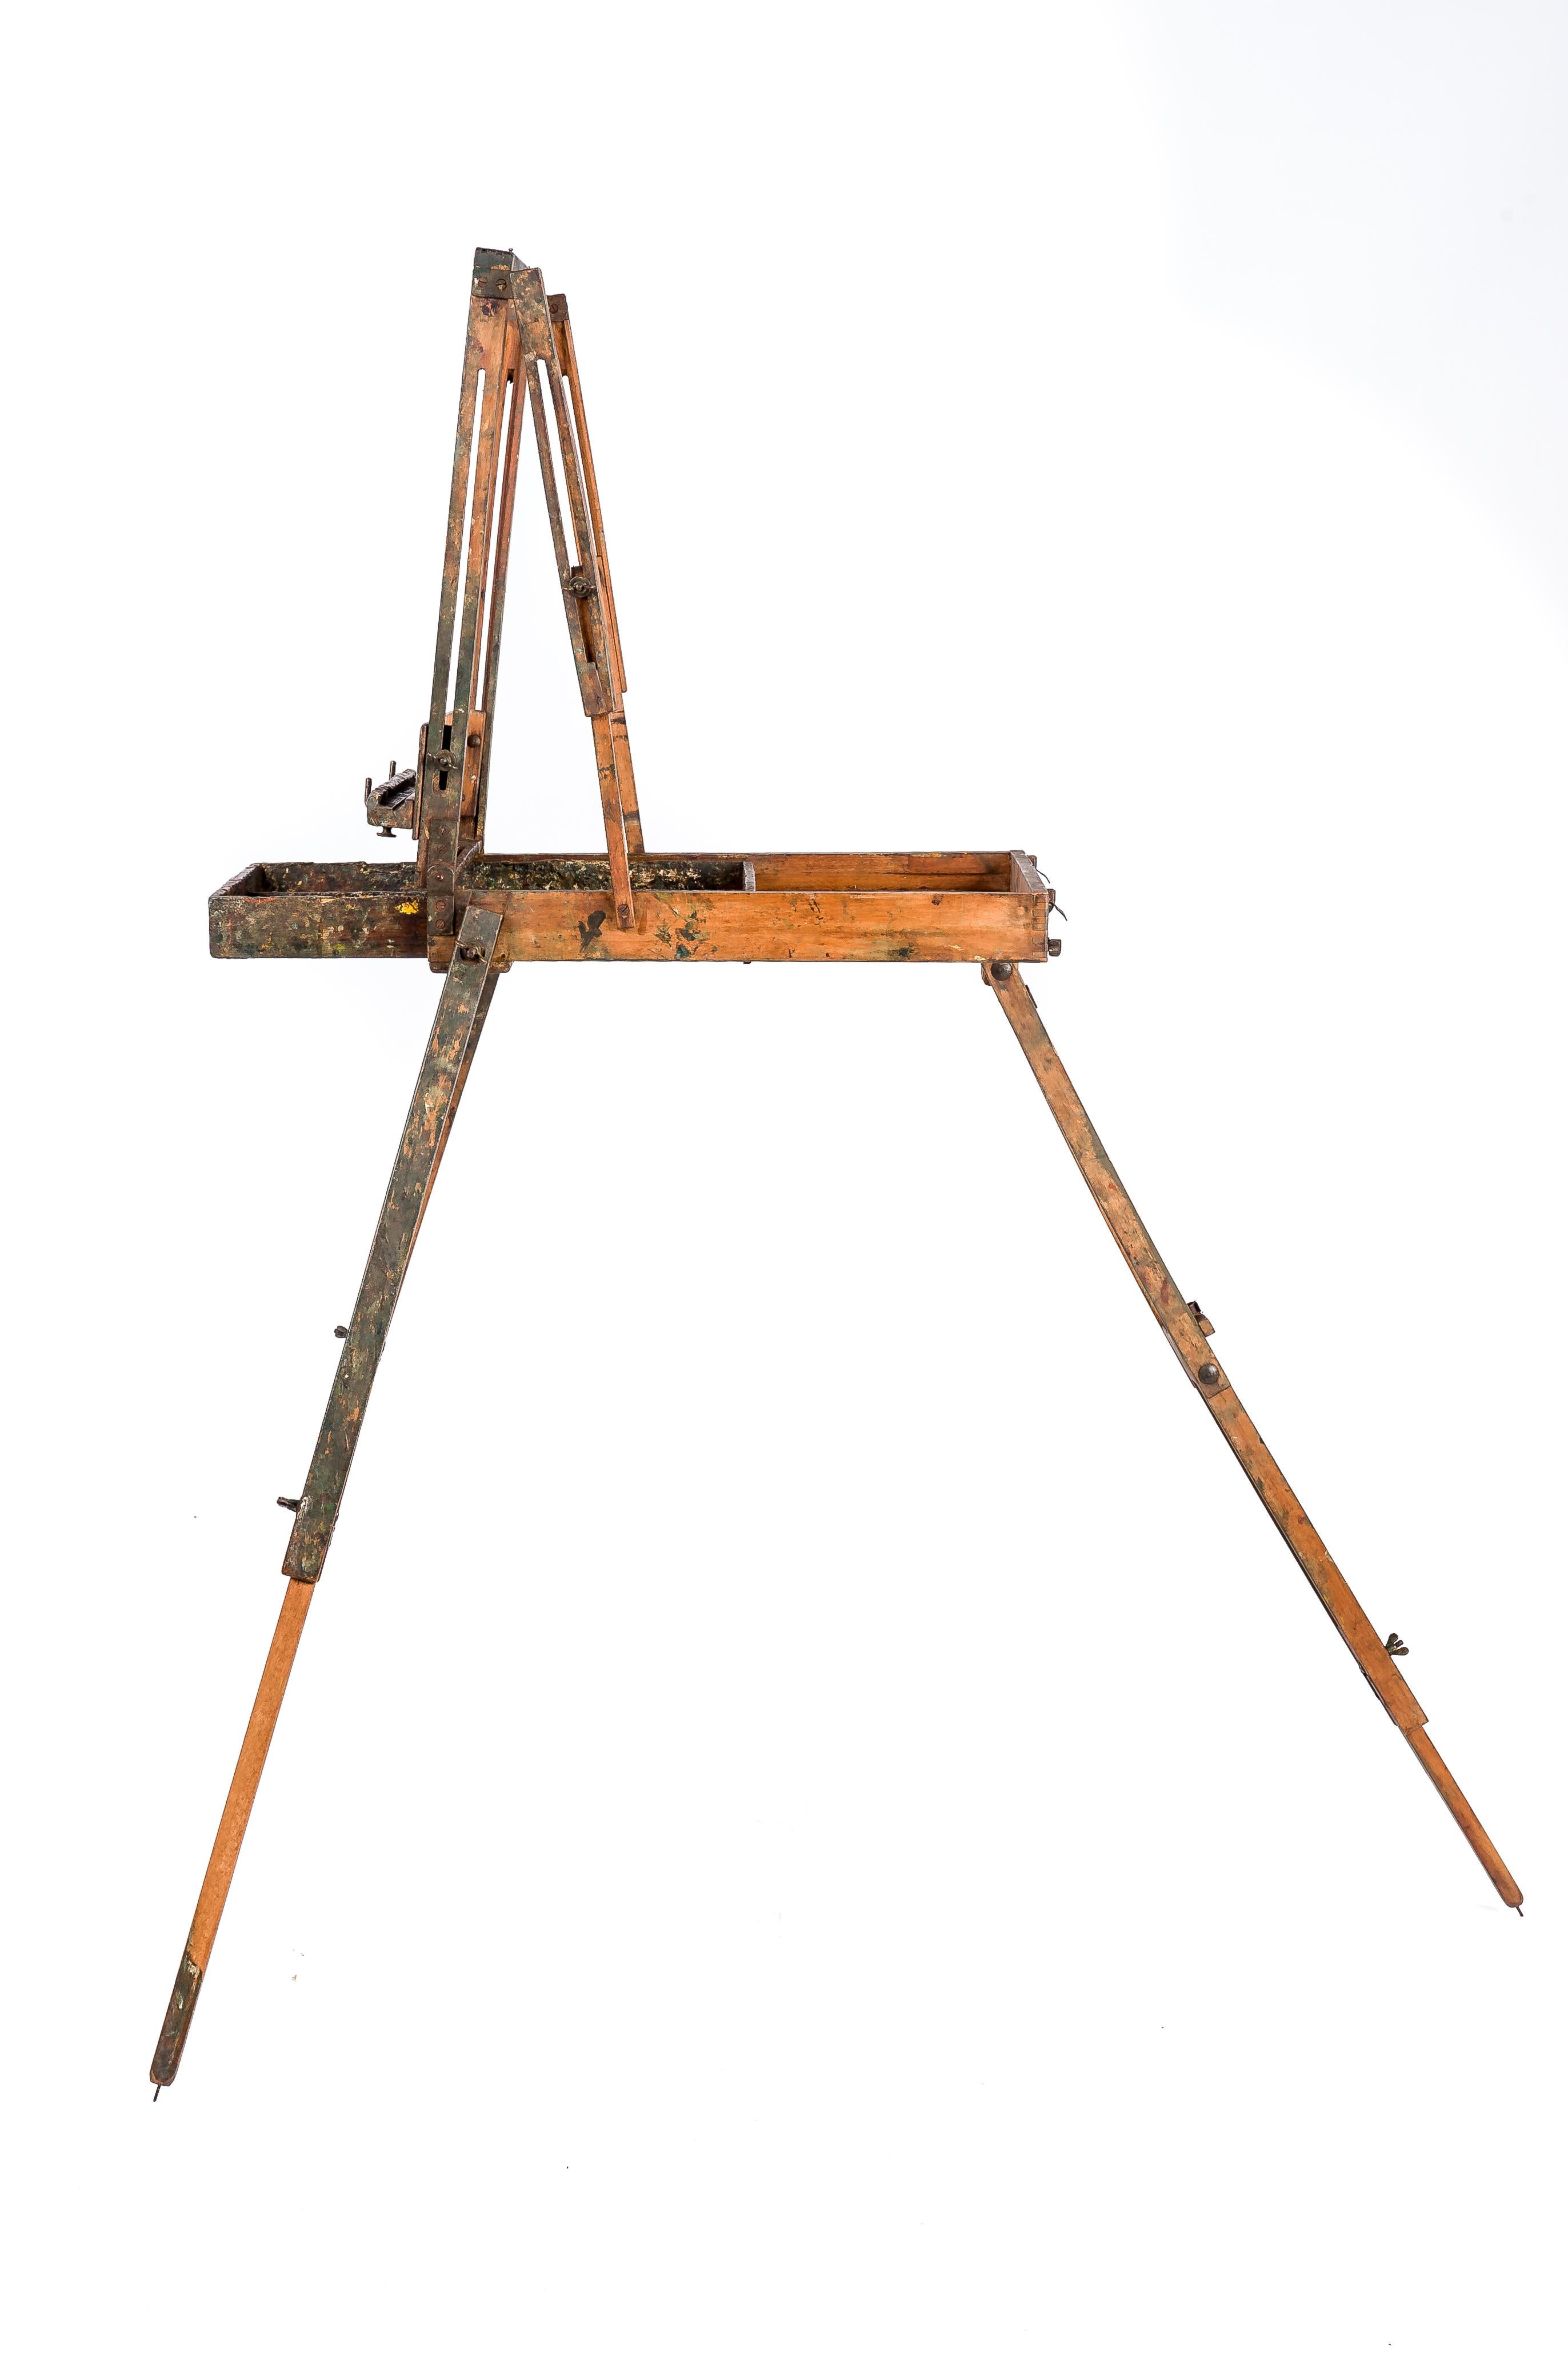 This elegant field easel was made in France in the early 1900s. The easel is fully adjustable in height and width and it also incorporates a drawer for keeping the paint. The whole piece folds down into an easy-to-carry package. The easel has been